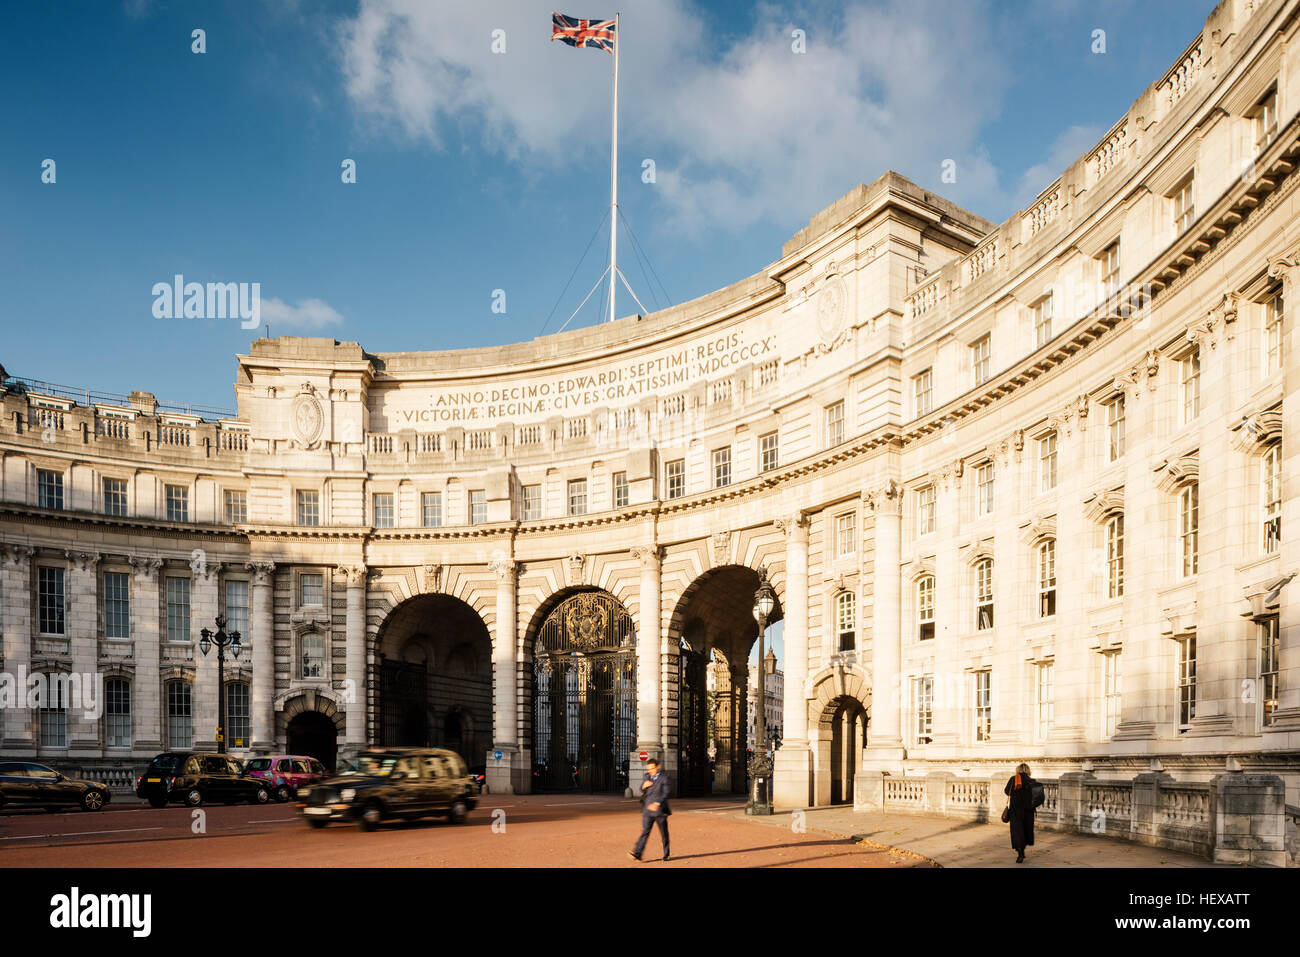 L'Admiralty Arch, London, UK Banque D'Images